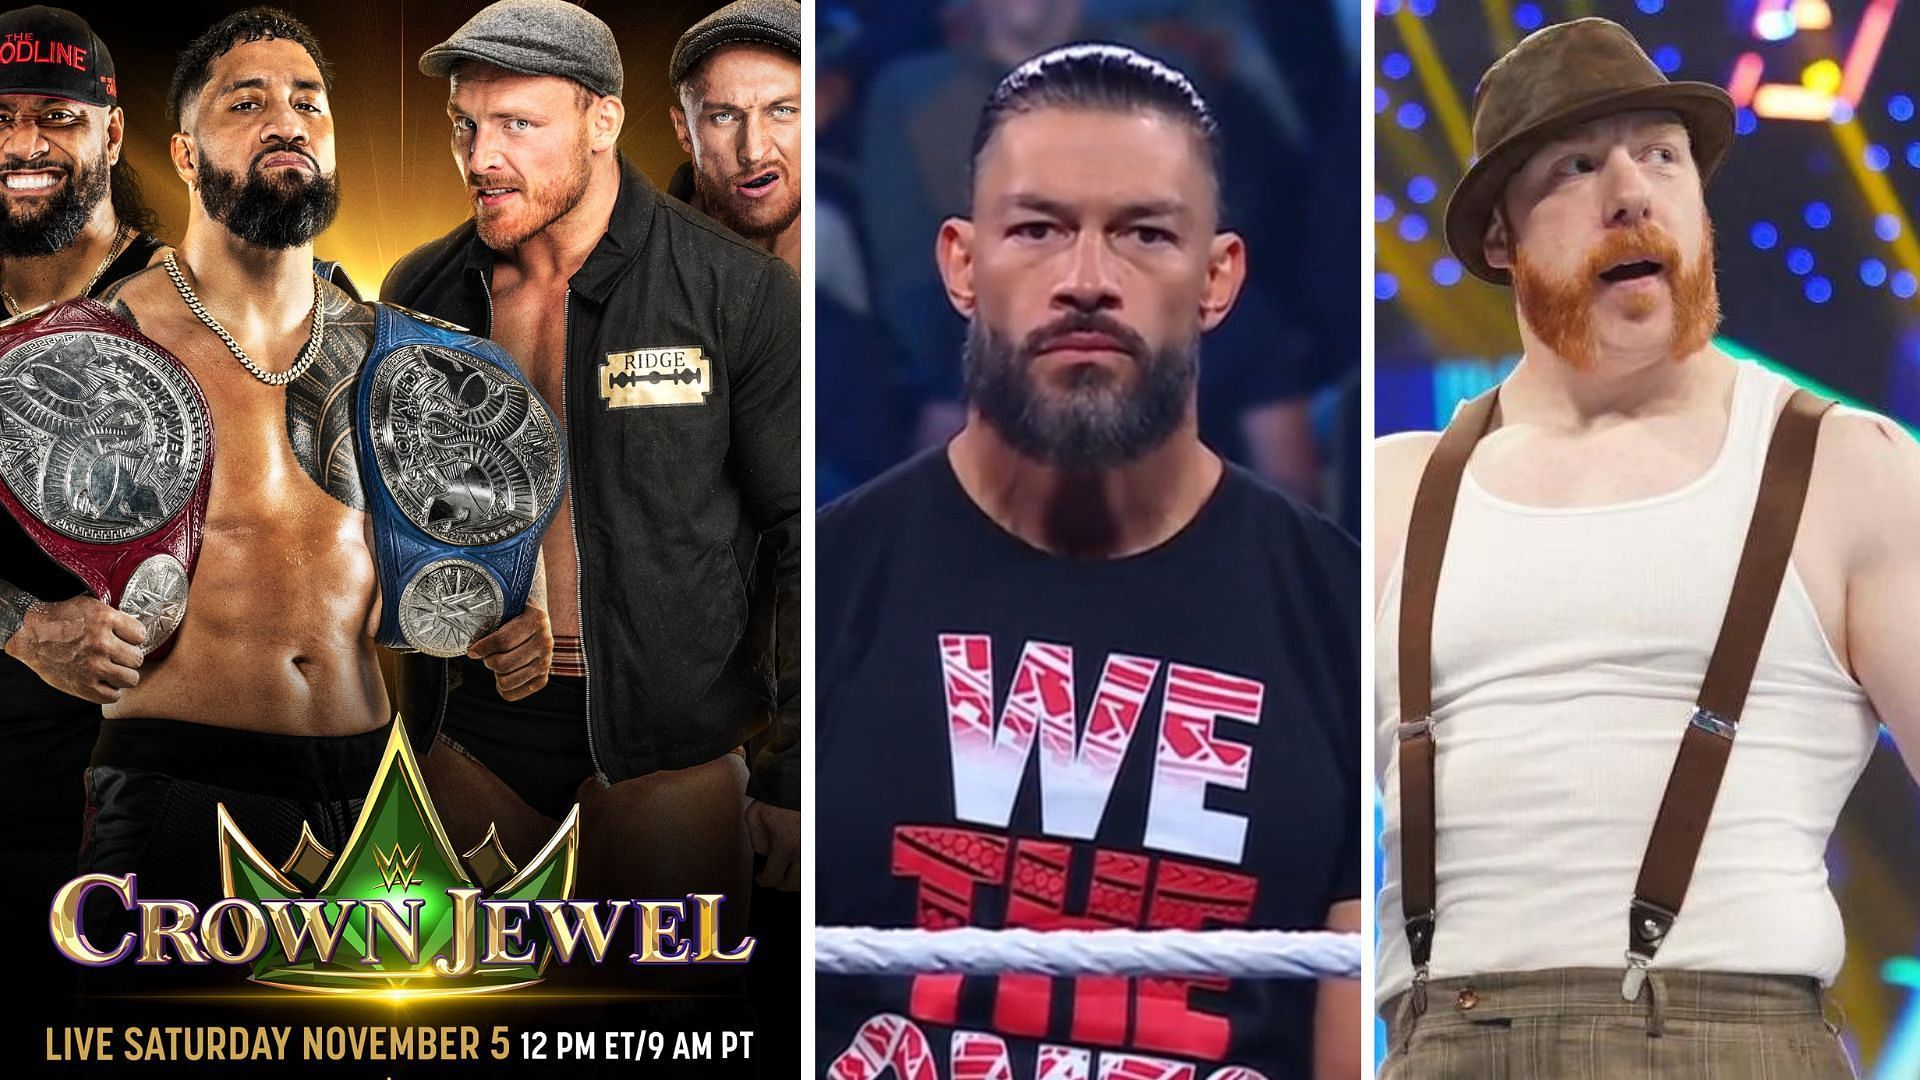 The Usos are set to battle the Brawling Brutes at WWE Crown Jewel